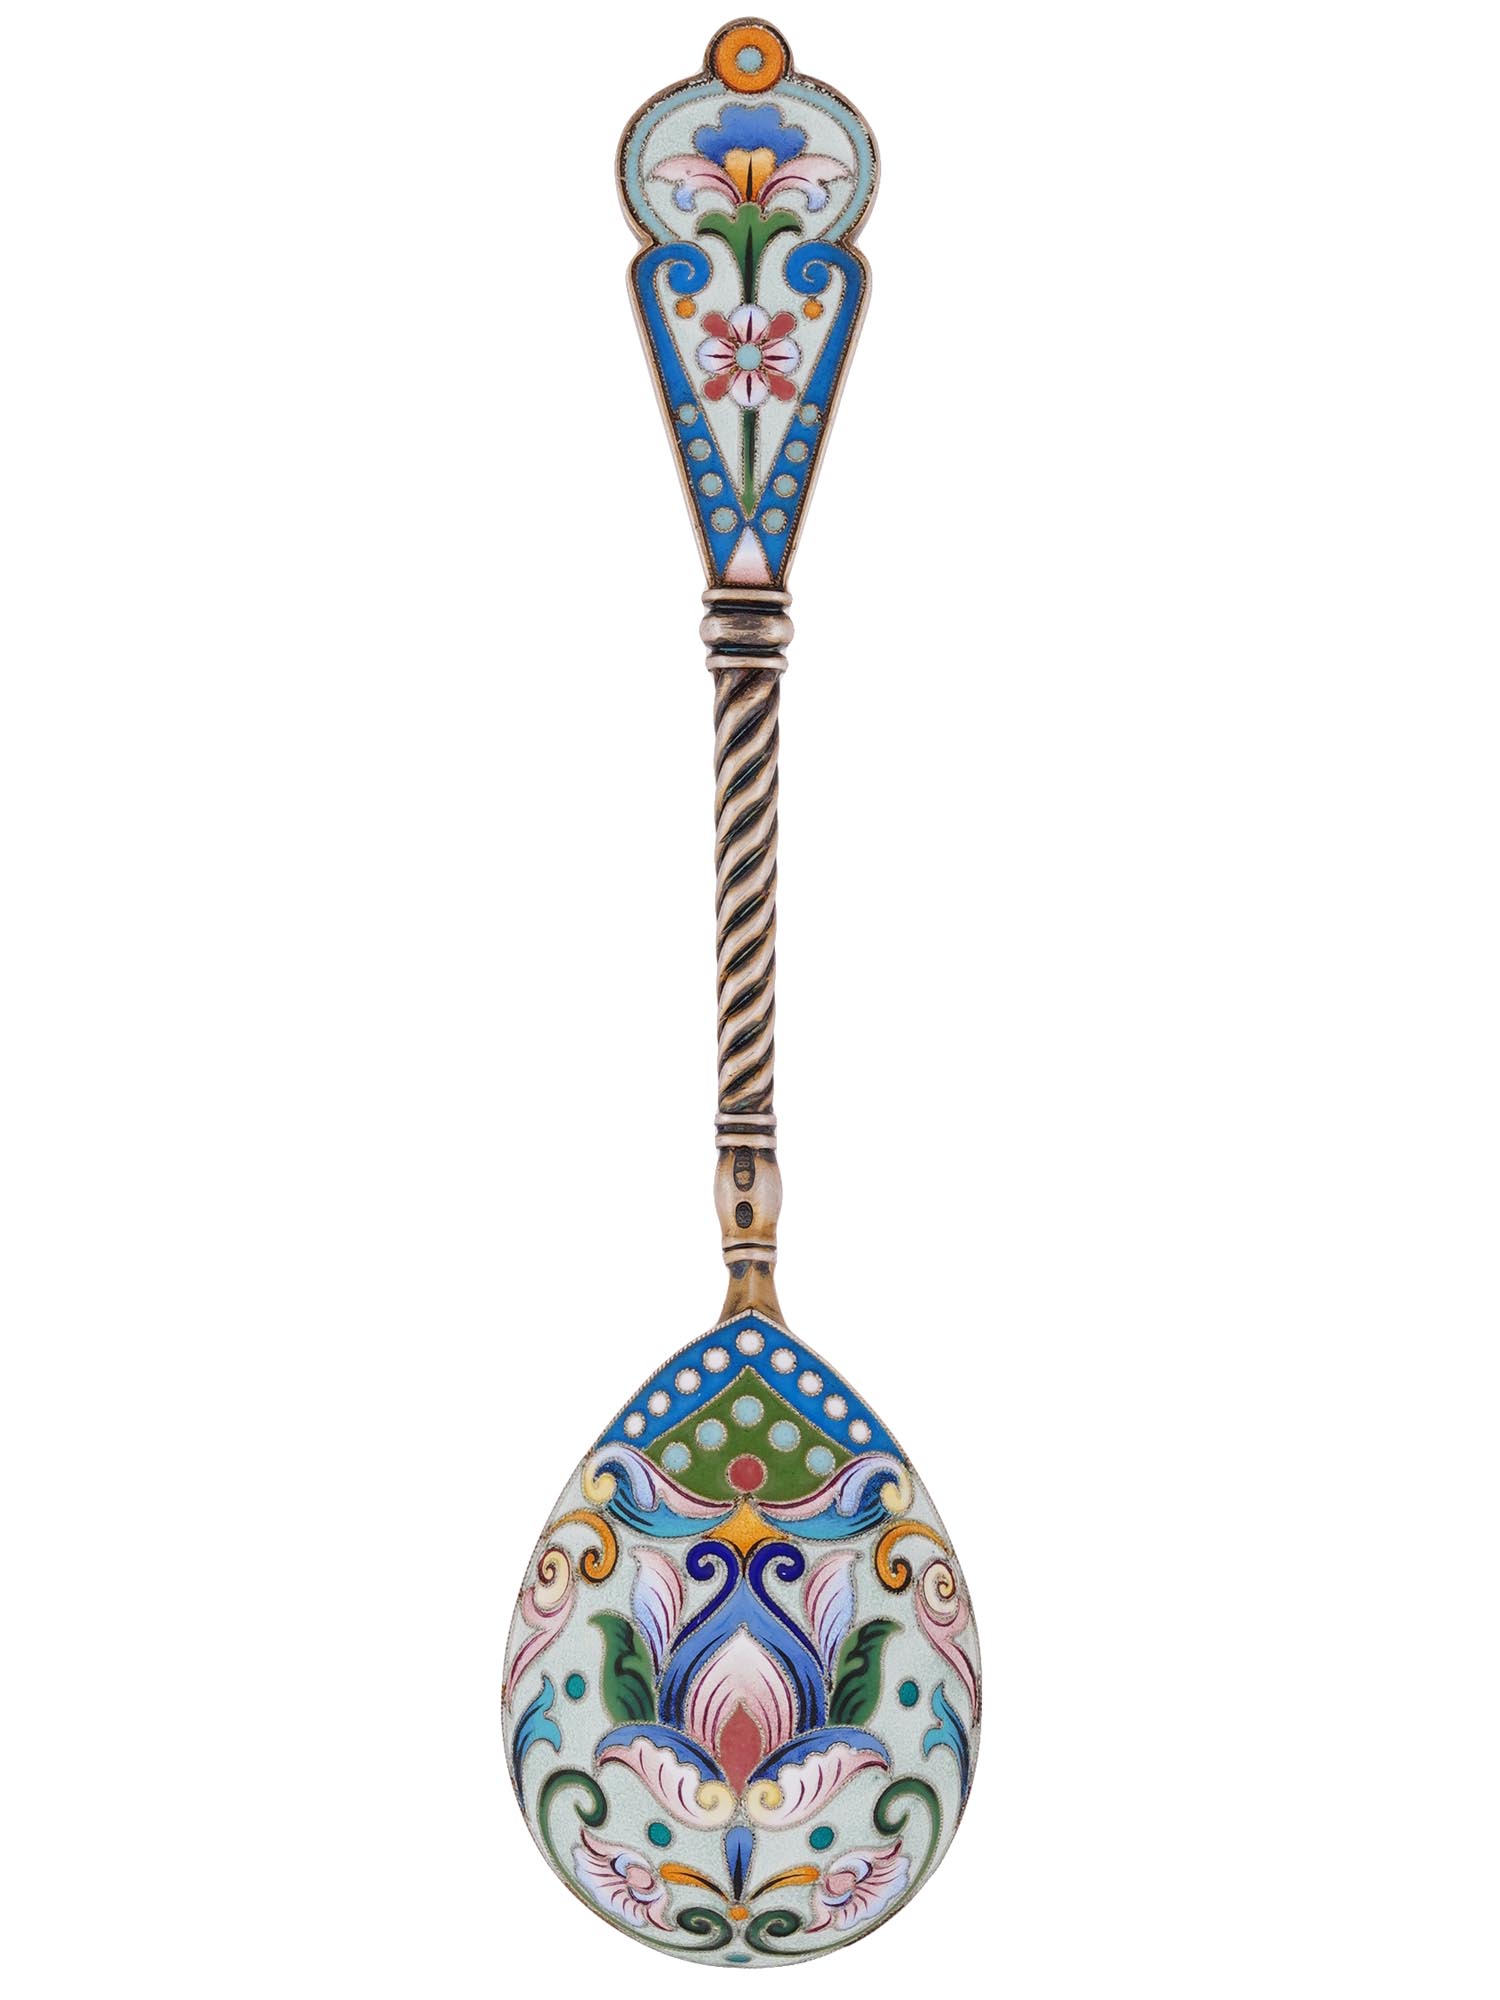 RUSSIAN SILVER ENAMEL SPOON WITH TWISTED STEM PIC-0